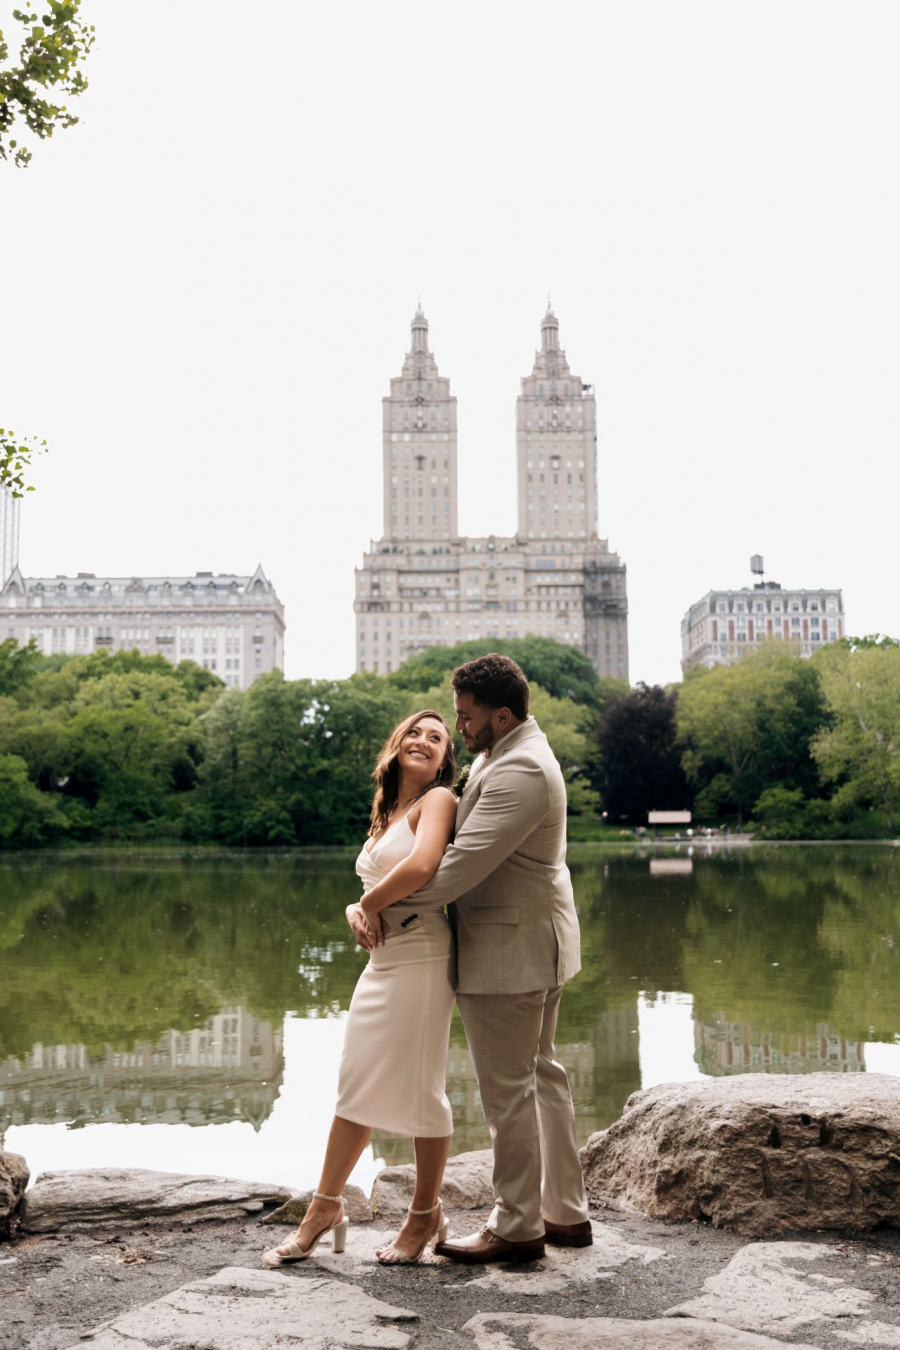 Simple wedding in Central Park NY 17